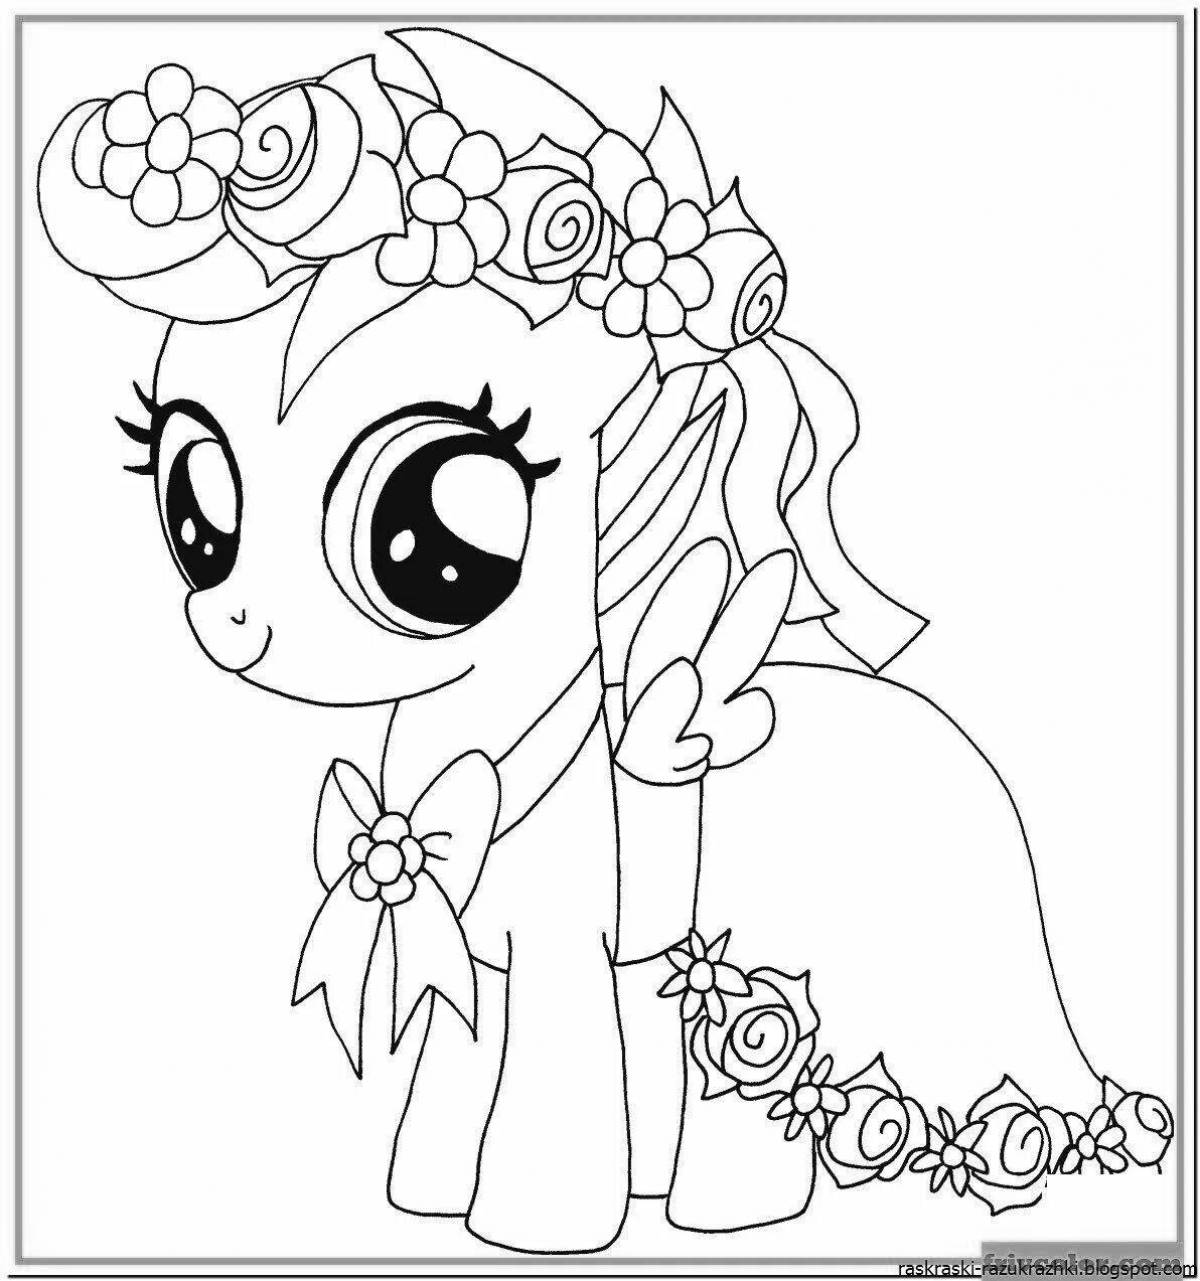 Coloring page for pony girls